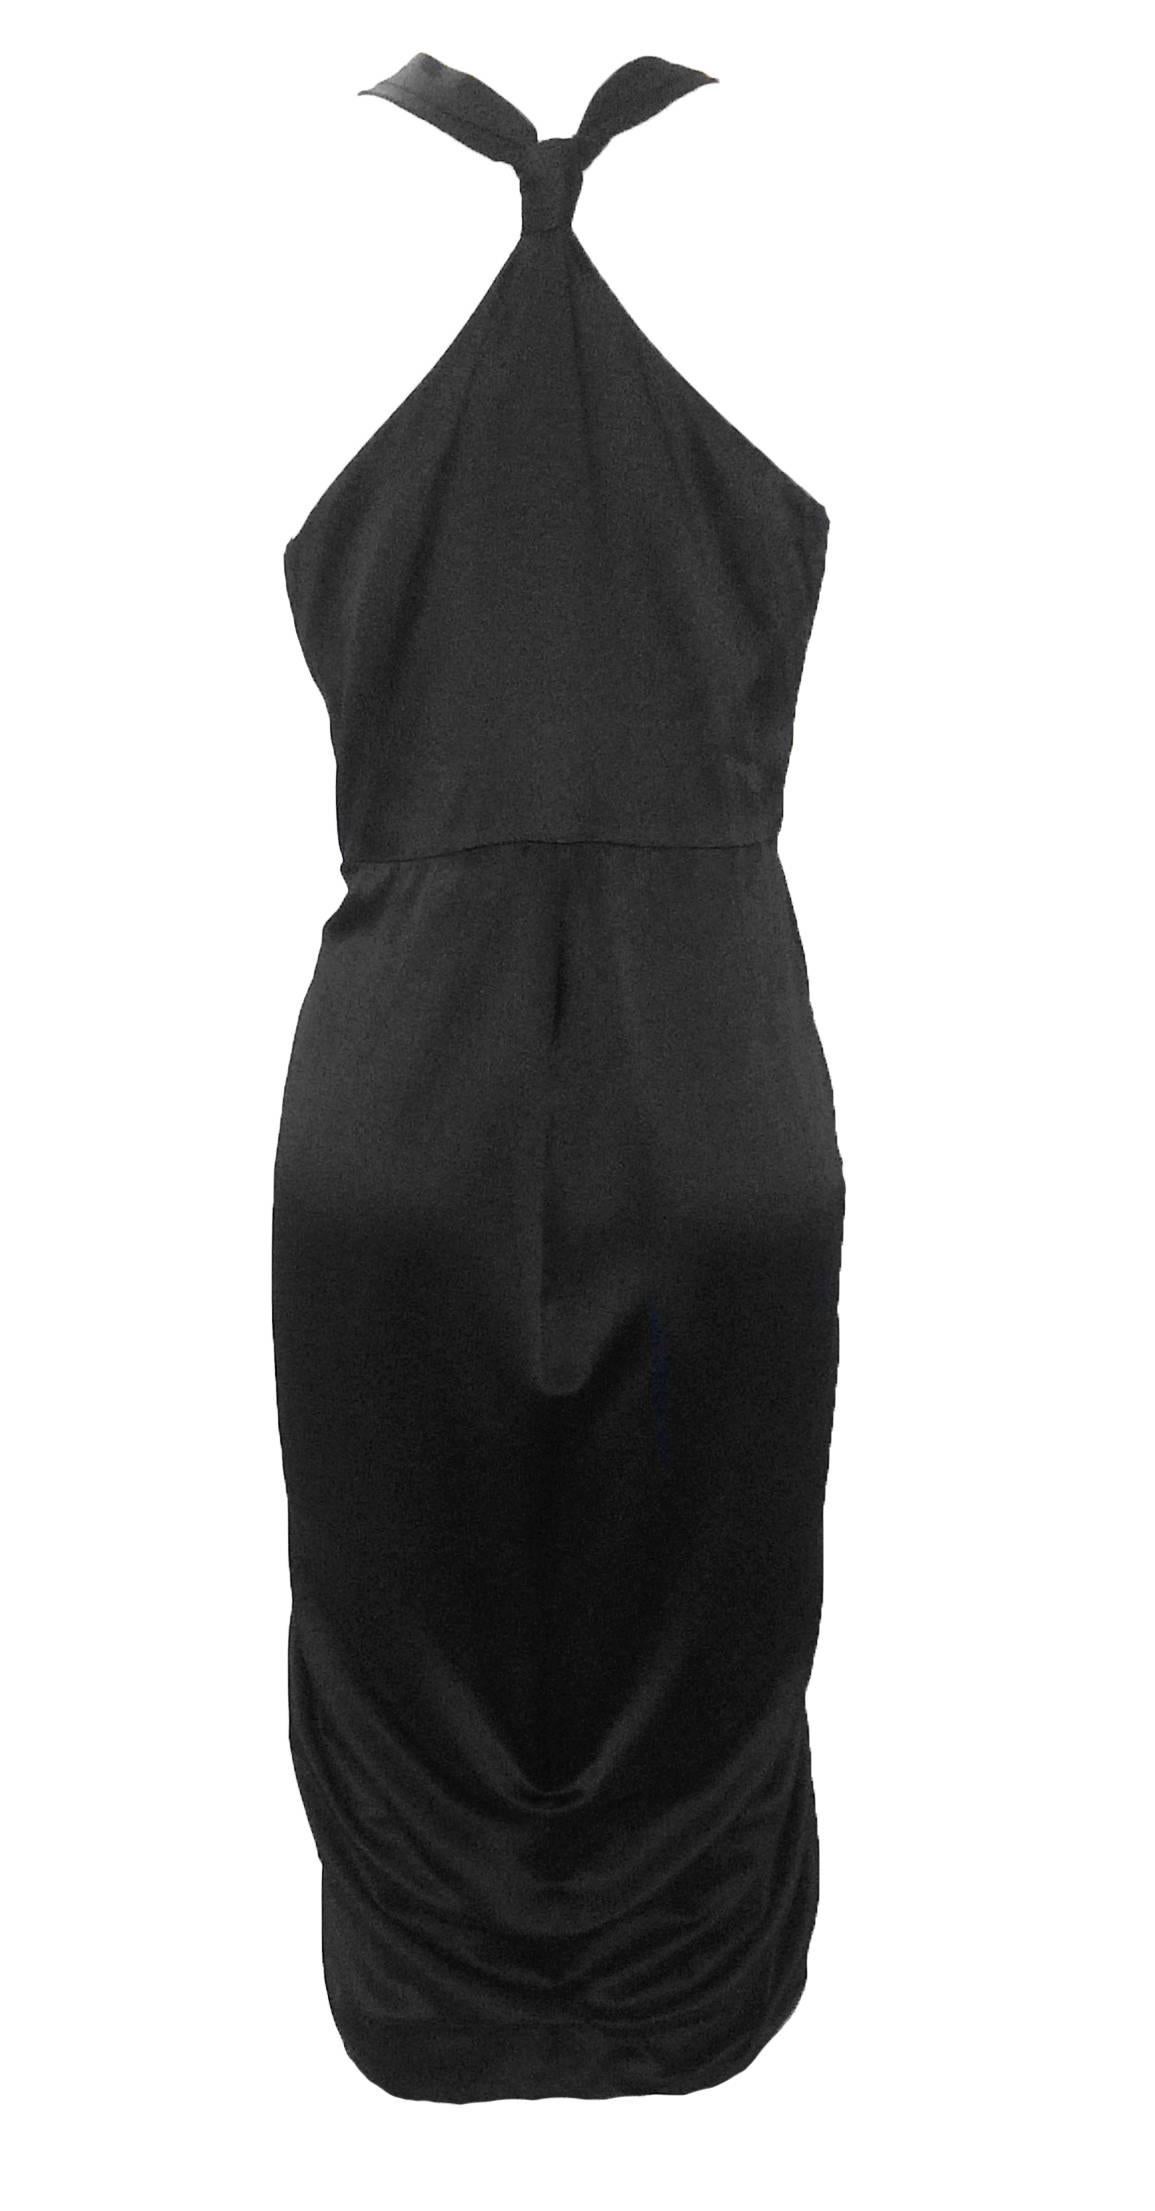 Alexander McQueen black silk cocktail dress from 2010. Pleated detail adorns the top, while dress falls in a wrap style at the bottom. Knotted racerback.

100% silk. 
Fully lined in 74% acetate, 26% silk.

Made in Italy.

Size IT 42, approx US 6.